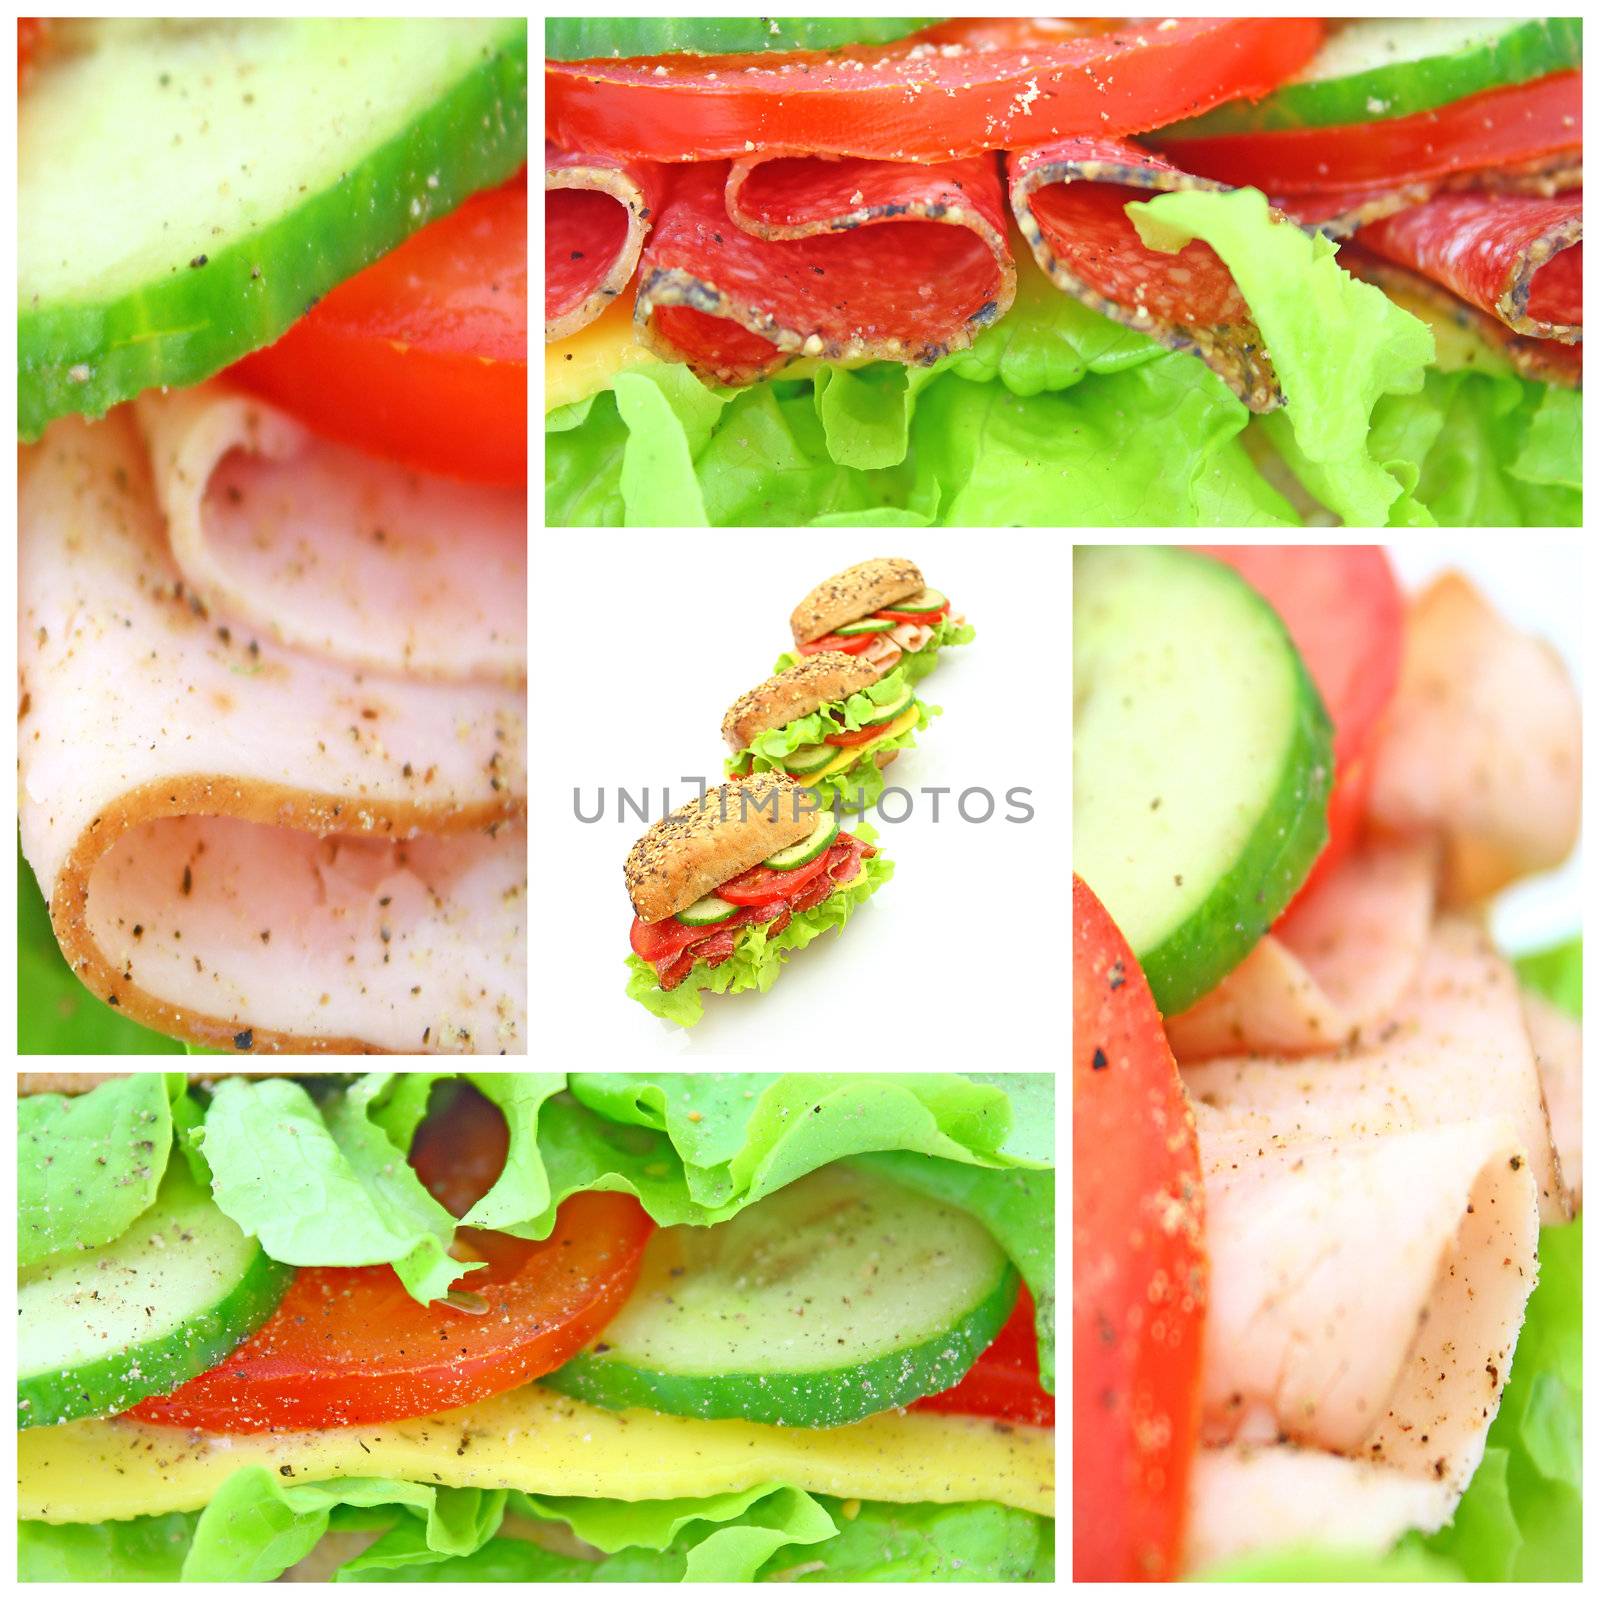 Collage of many different fresh sandwichs by juweber